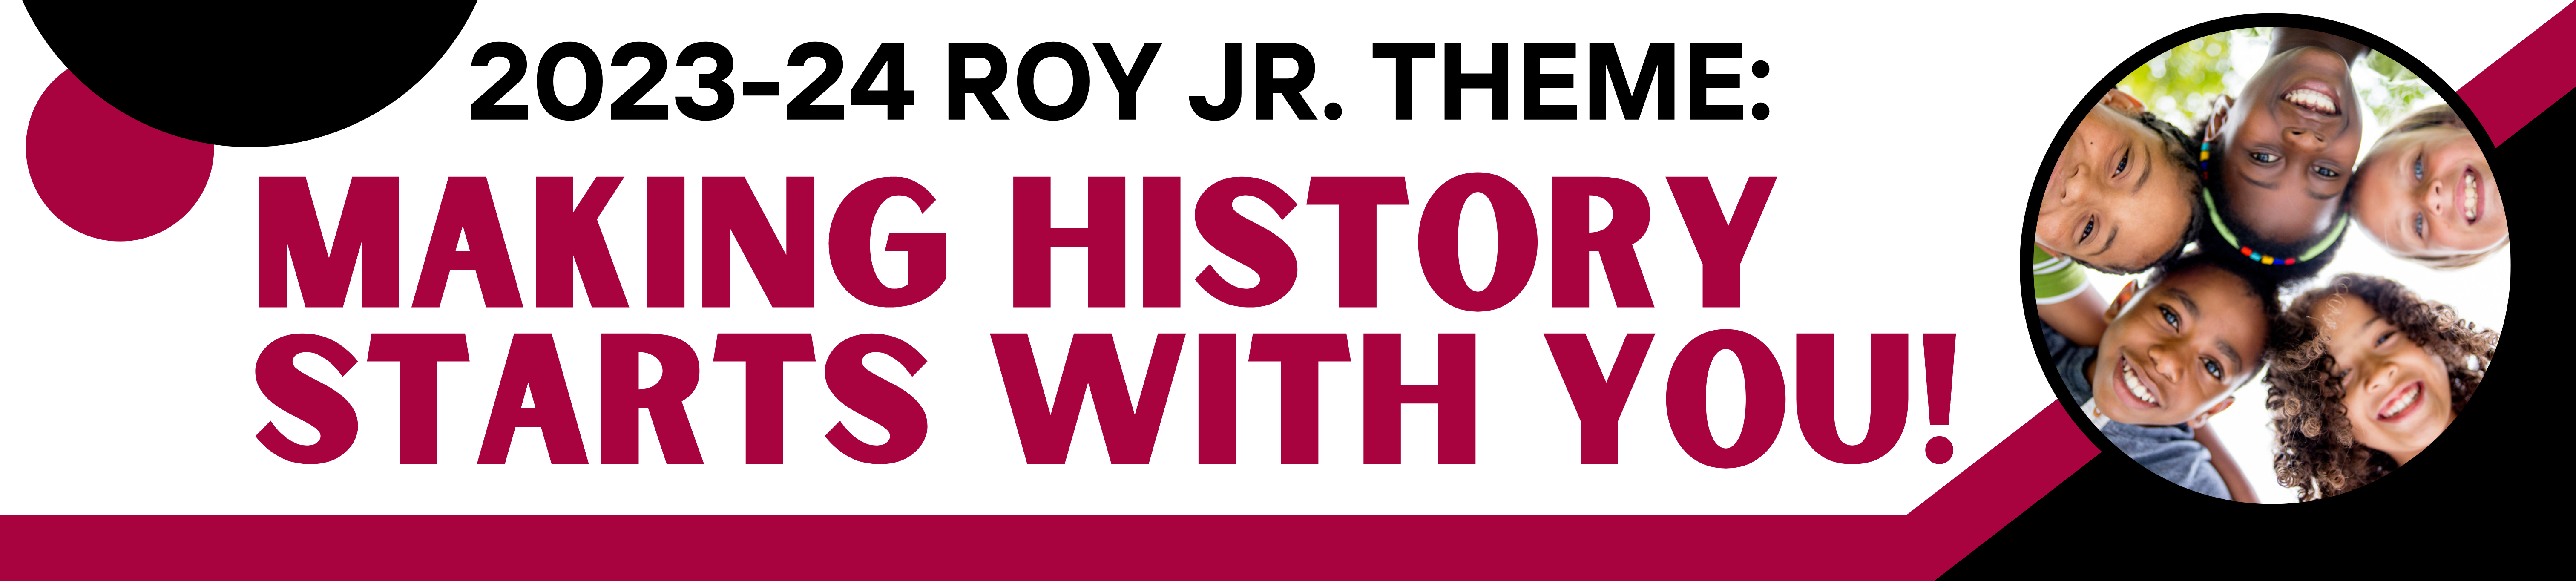 Roy Junior 2023-2024 Theme is "Making History Starts With You!"